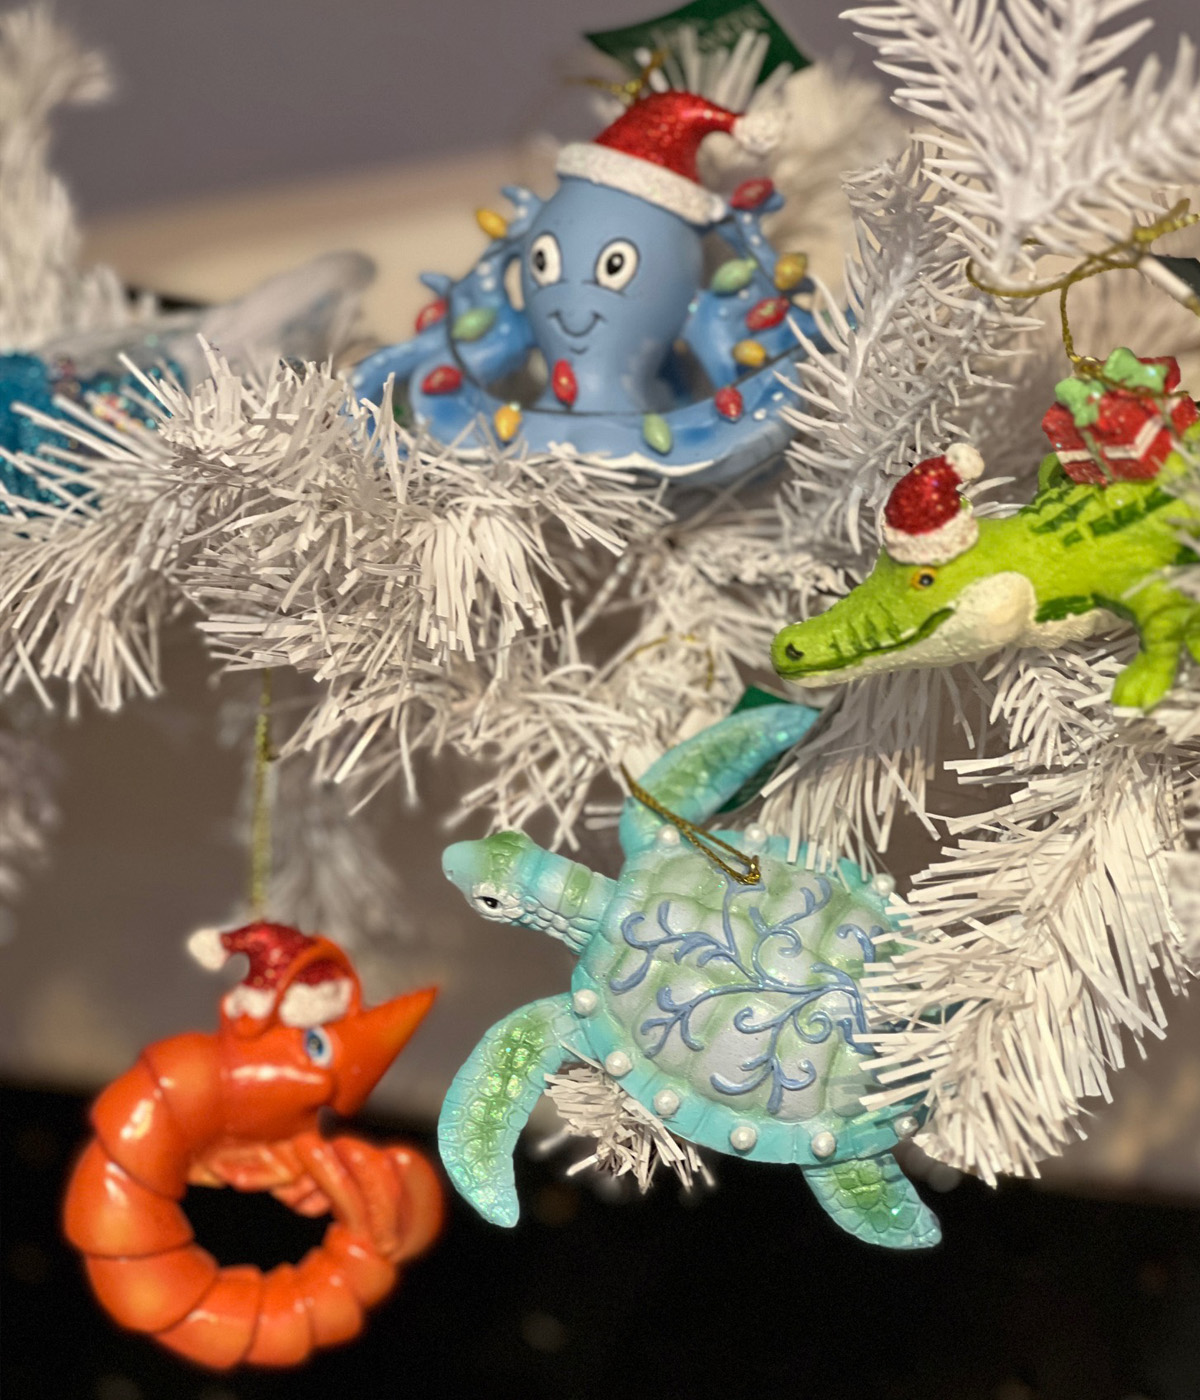 From brilliant blues & pinks to silver & gold. These ornaments will add a pop of colour to your Christmas tree